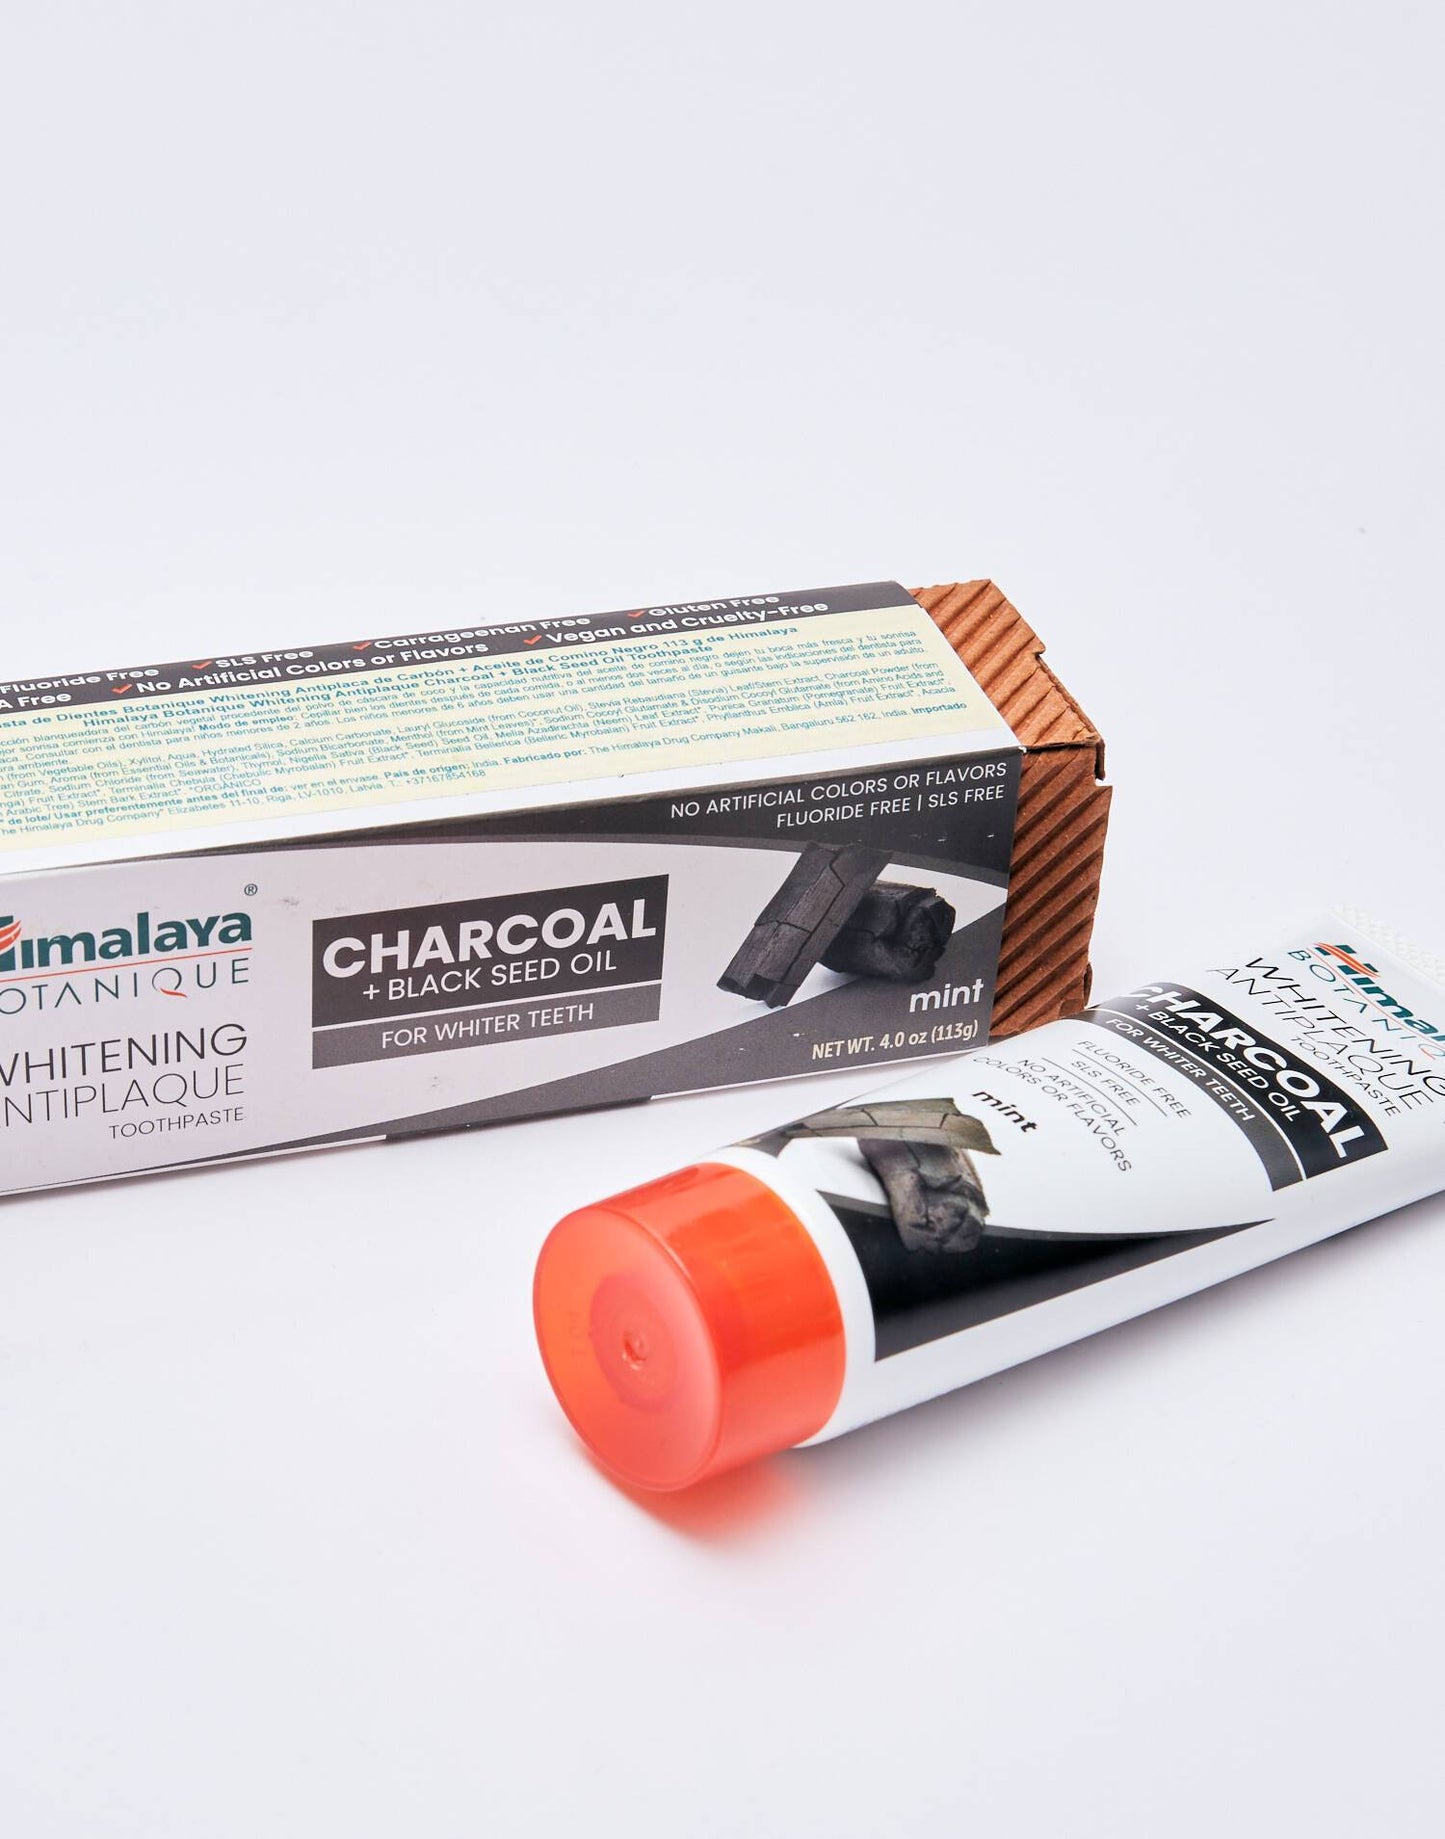 Toothpaste Charcoal and Black Seed Oil